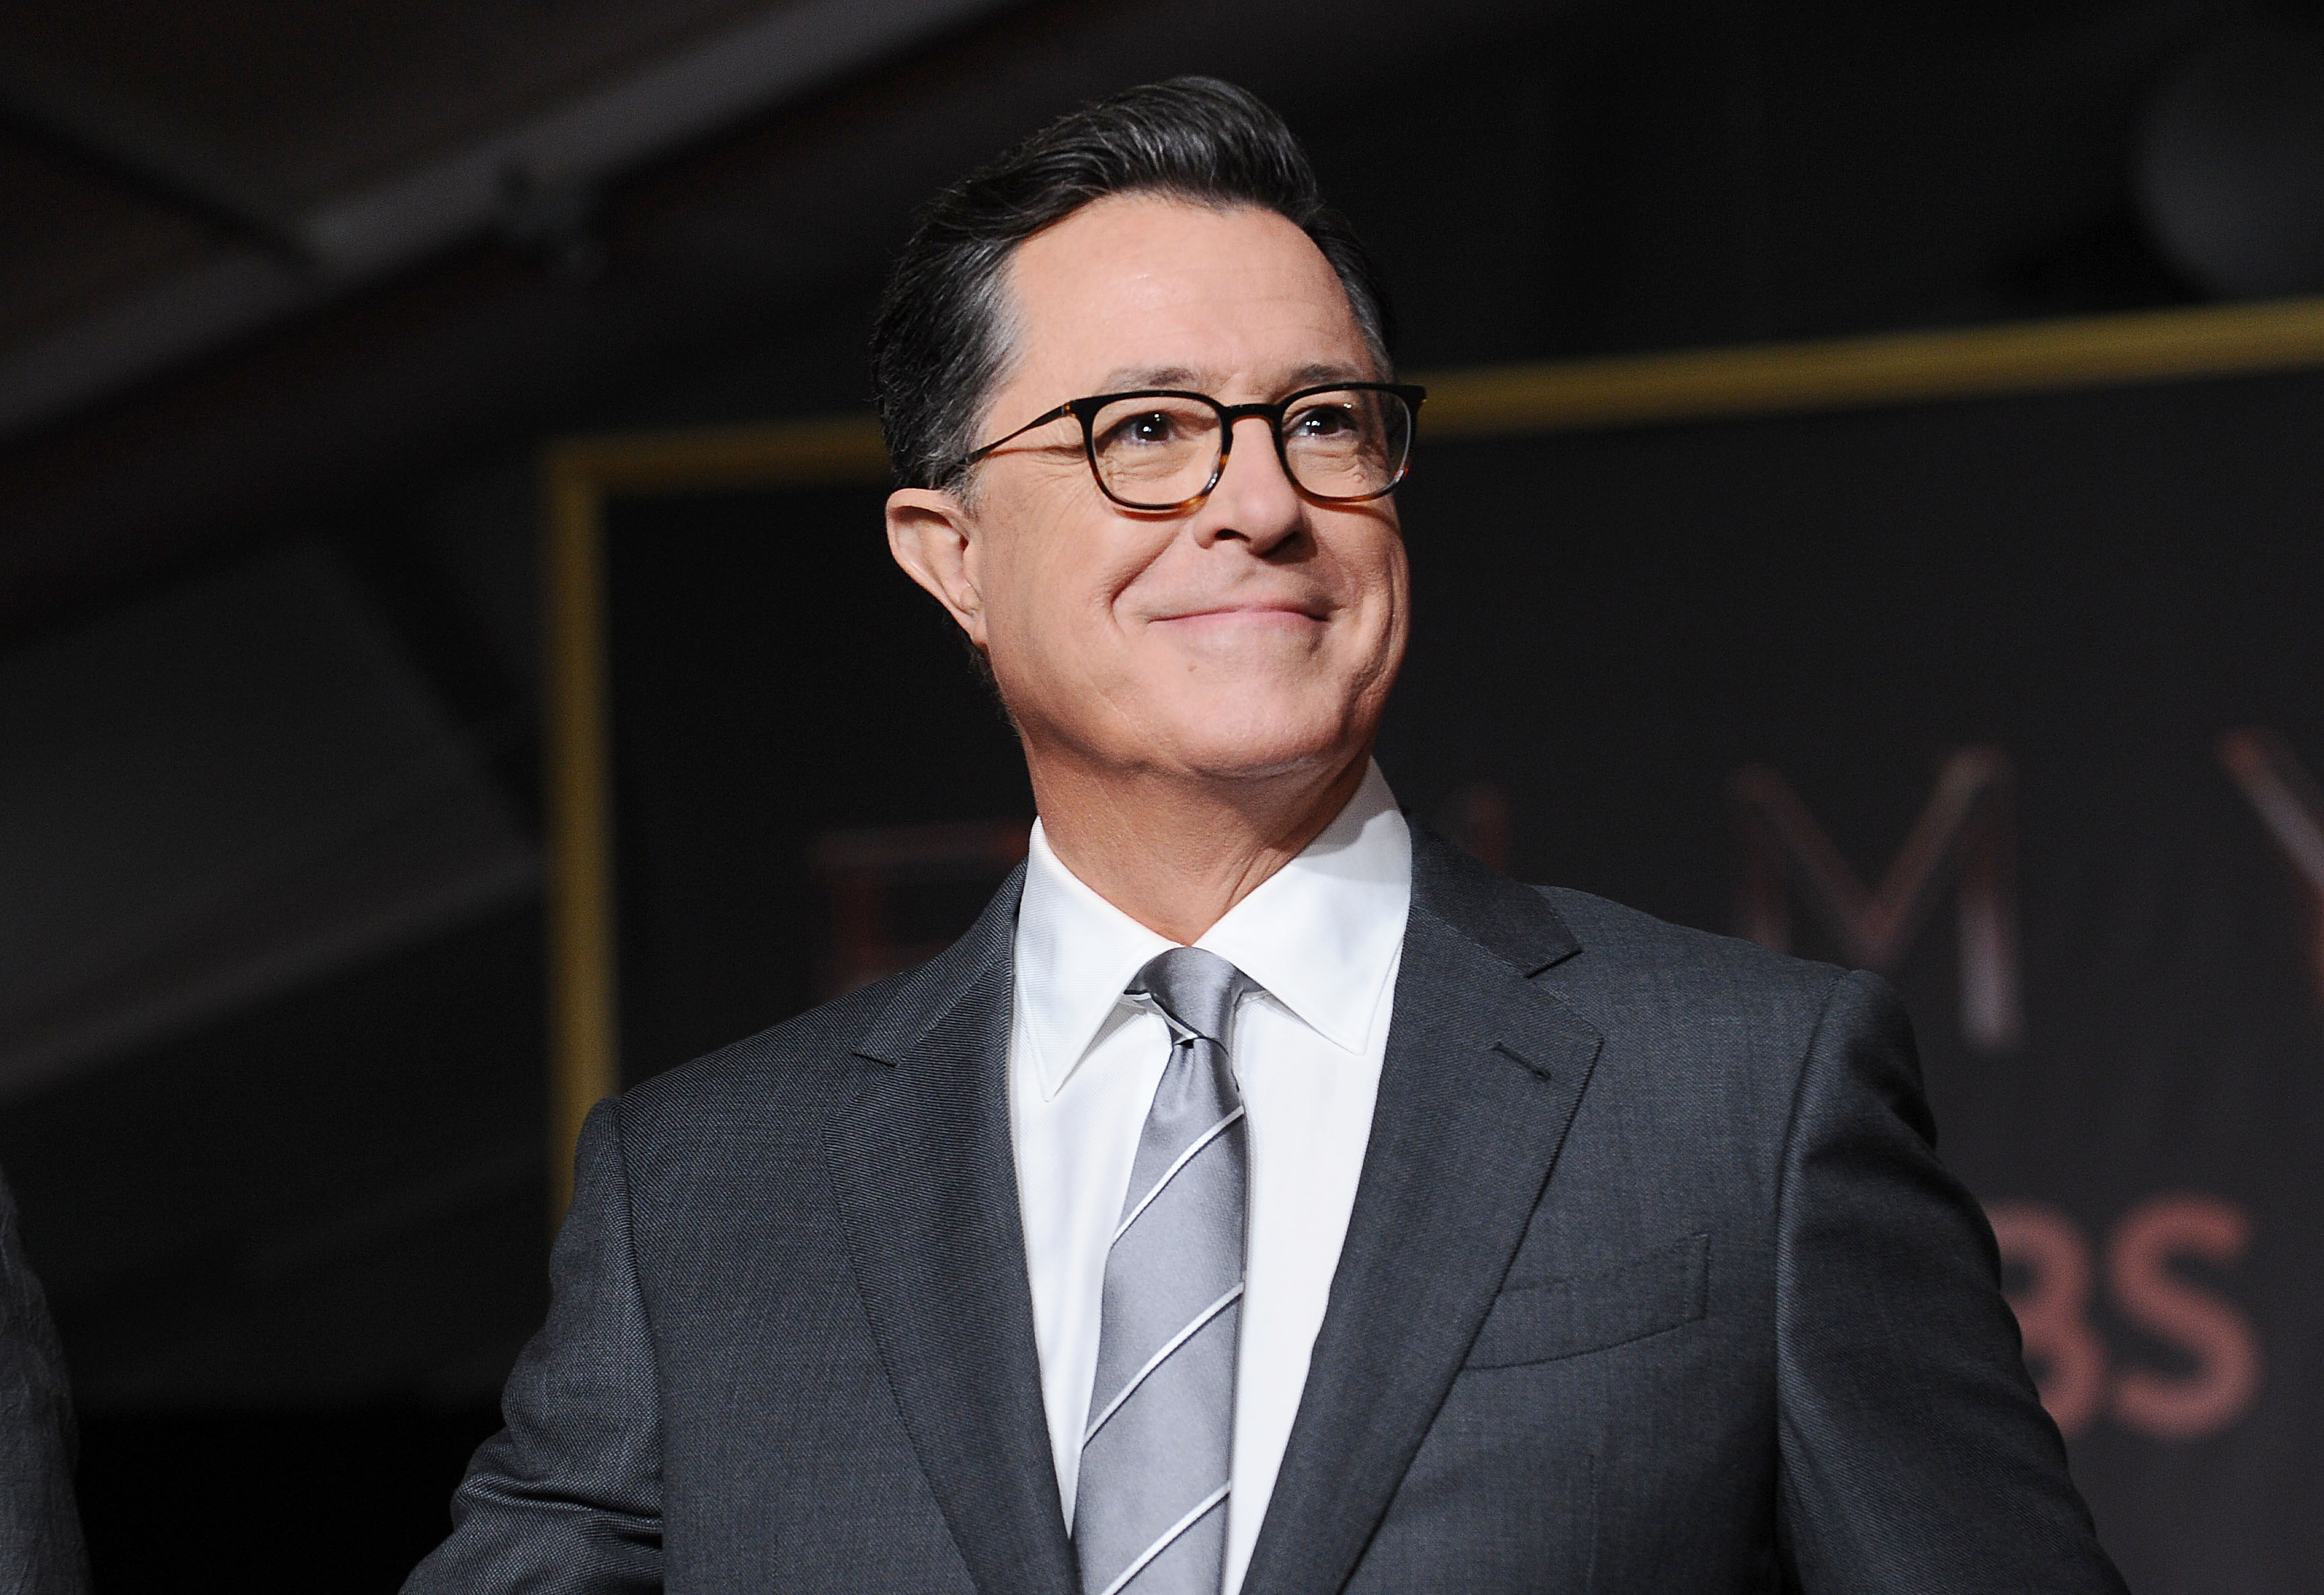 Stephen Colbert Net Worth How Much Does the Host Make? Money